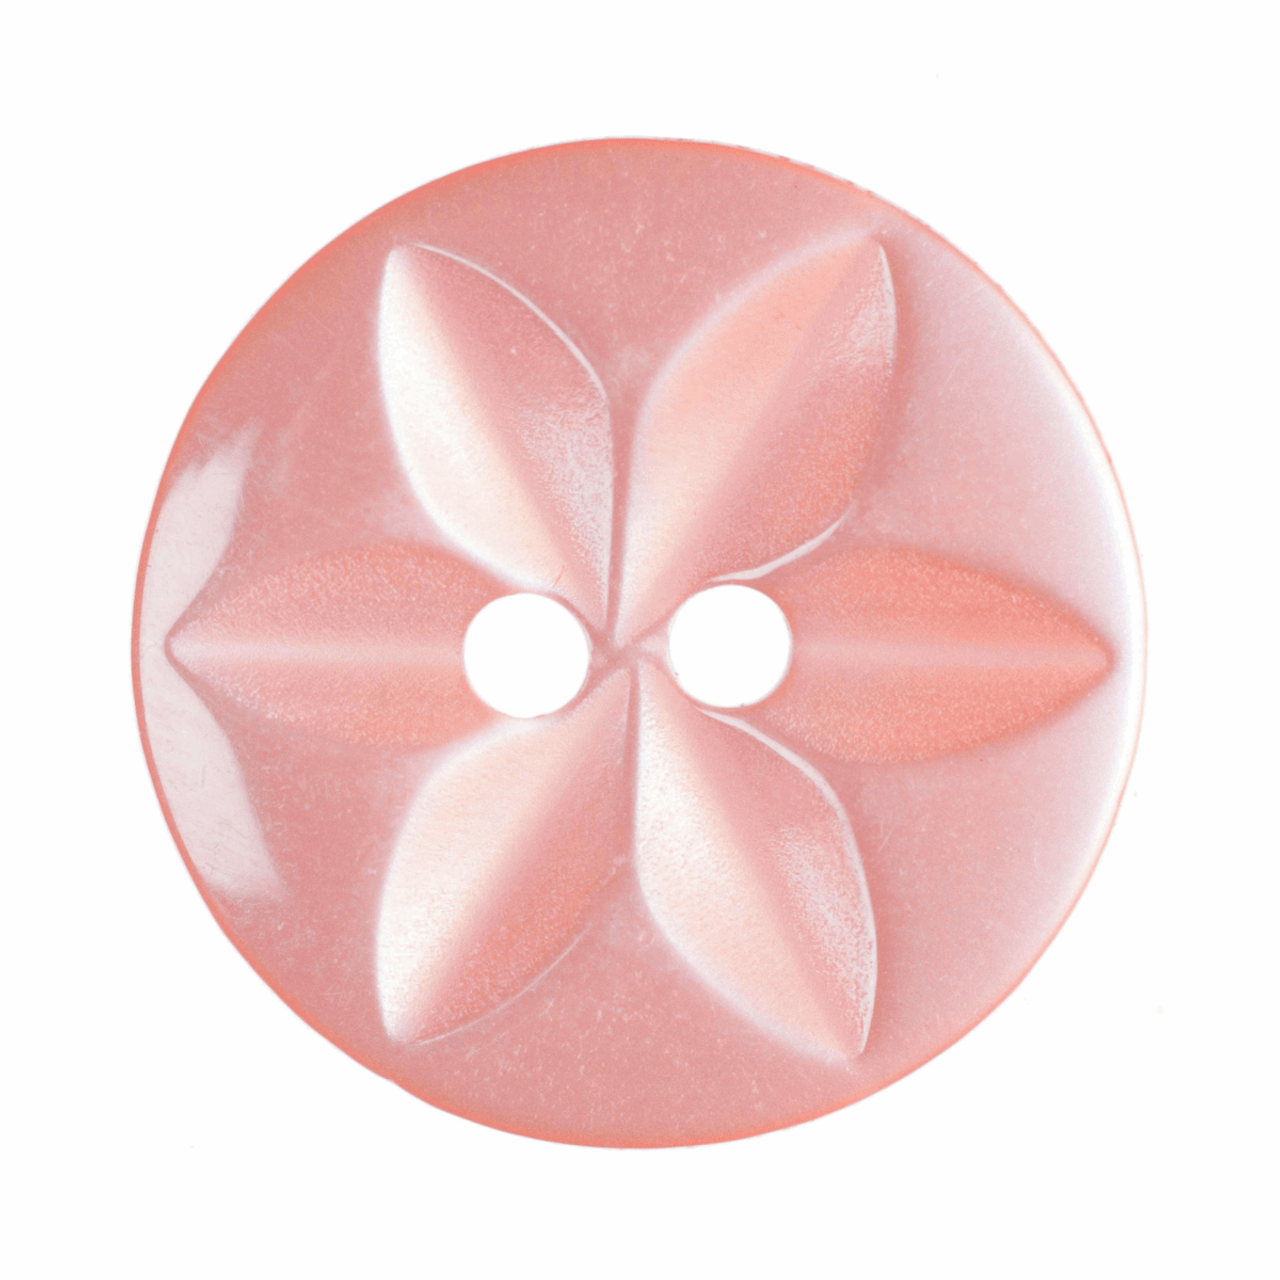 Salmon Pink Star Button, 11mm (7/16in) Diameter (Sold Individually)